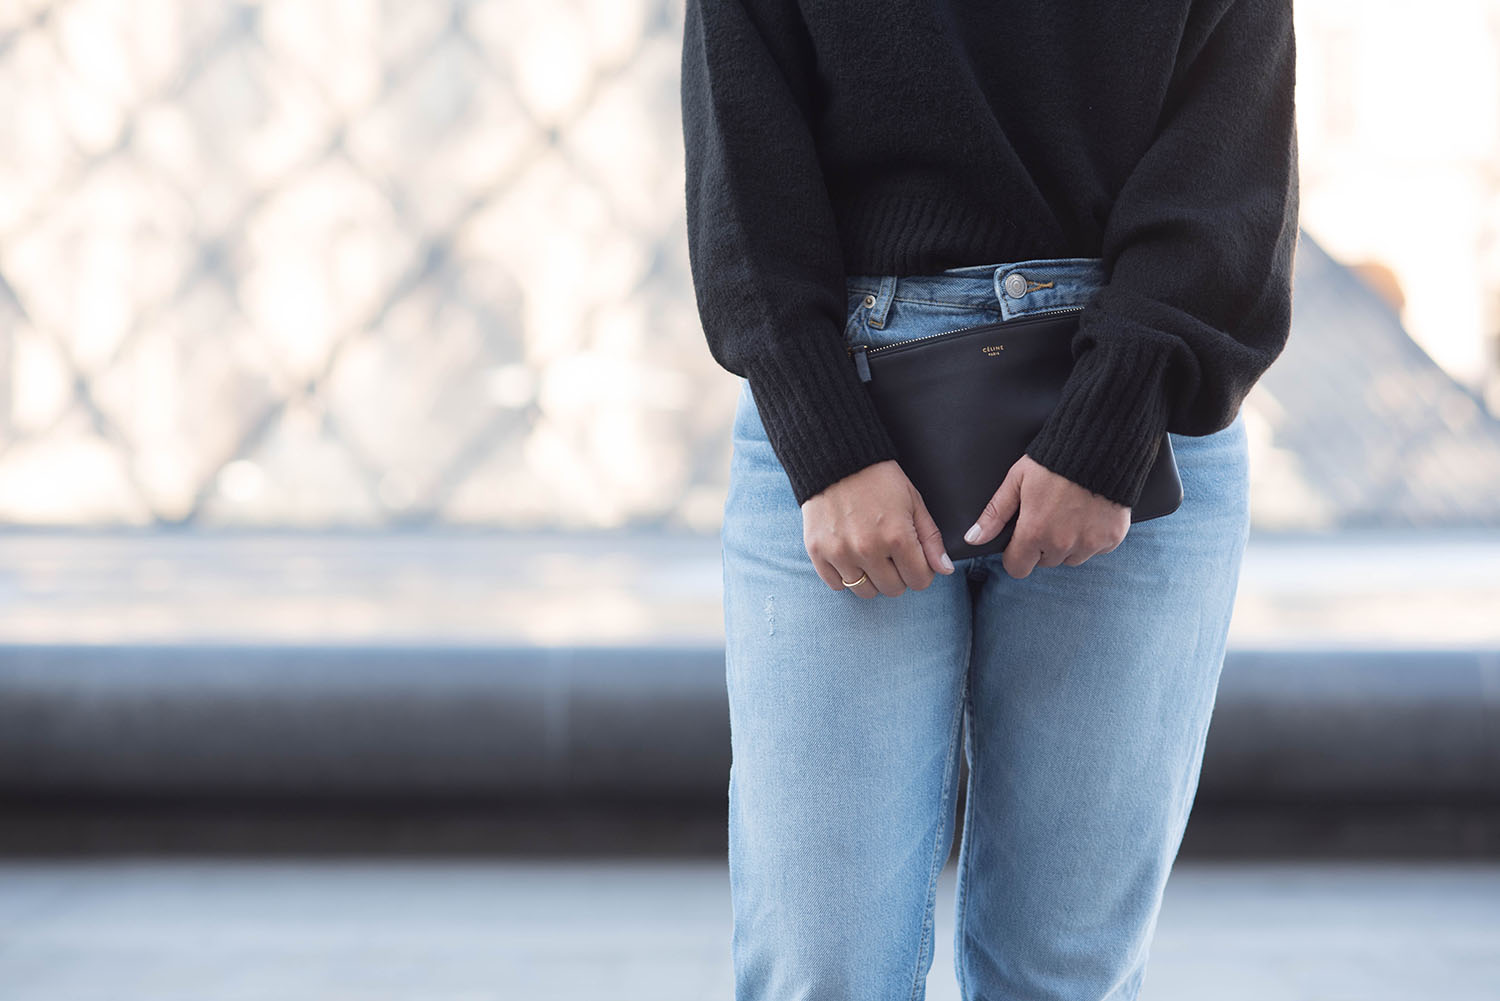 Outfit details on Canadian fashion blogger Cee Fardoe of Coco & Vera, kindling a Celine clutch, Zara boyfriend jeans and a sweater from & Other Stories